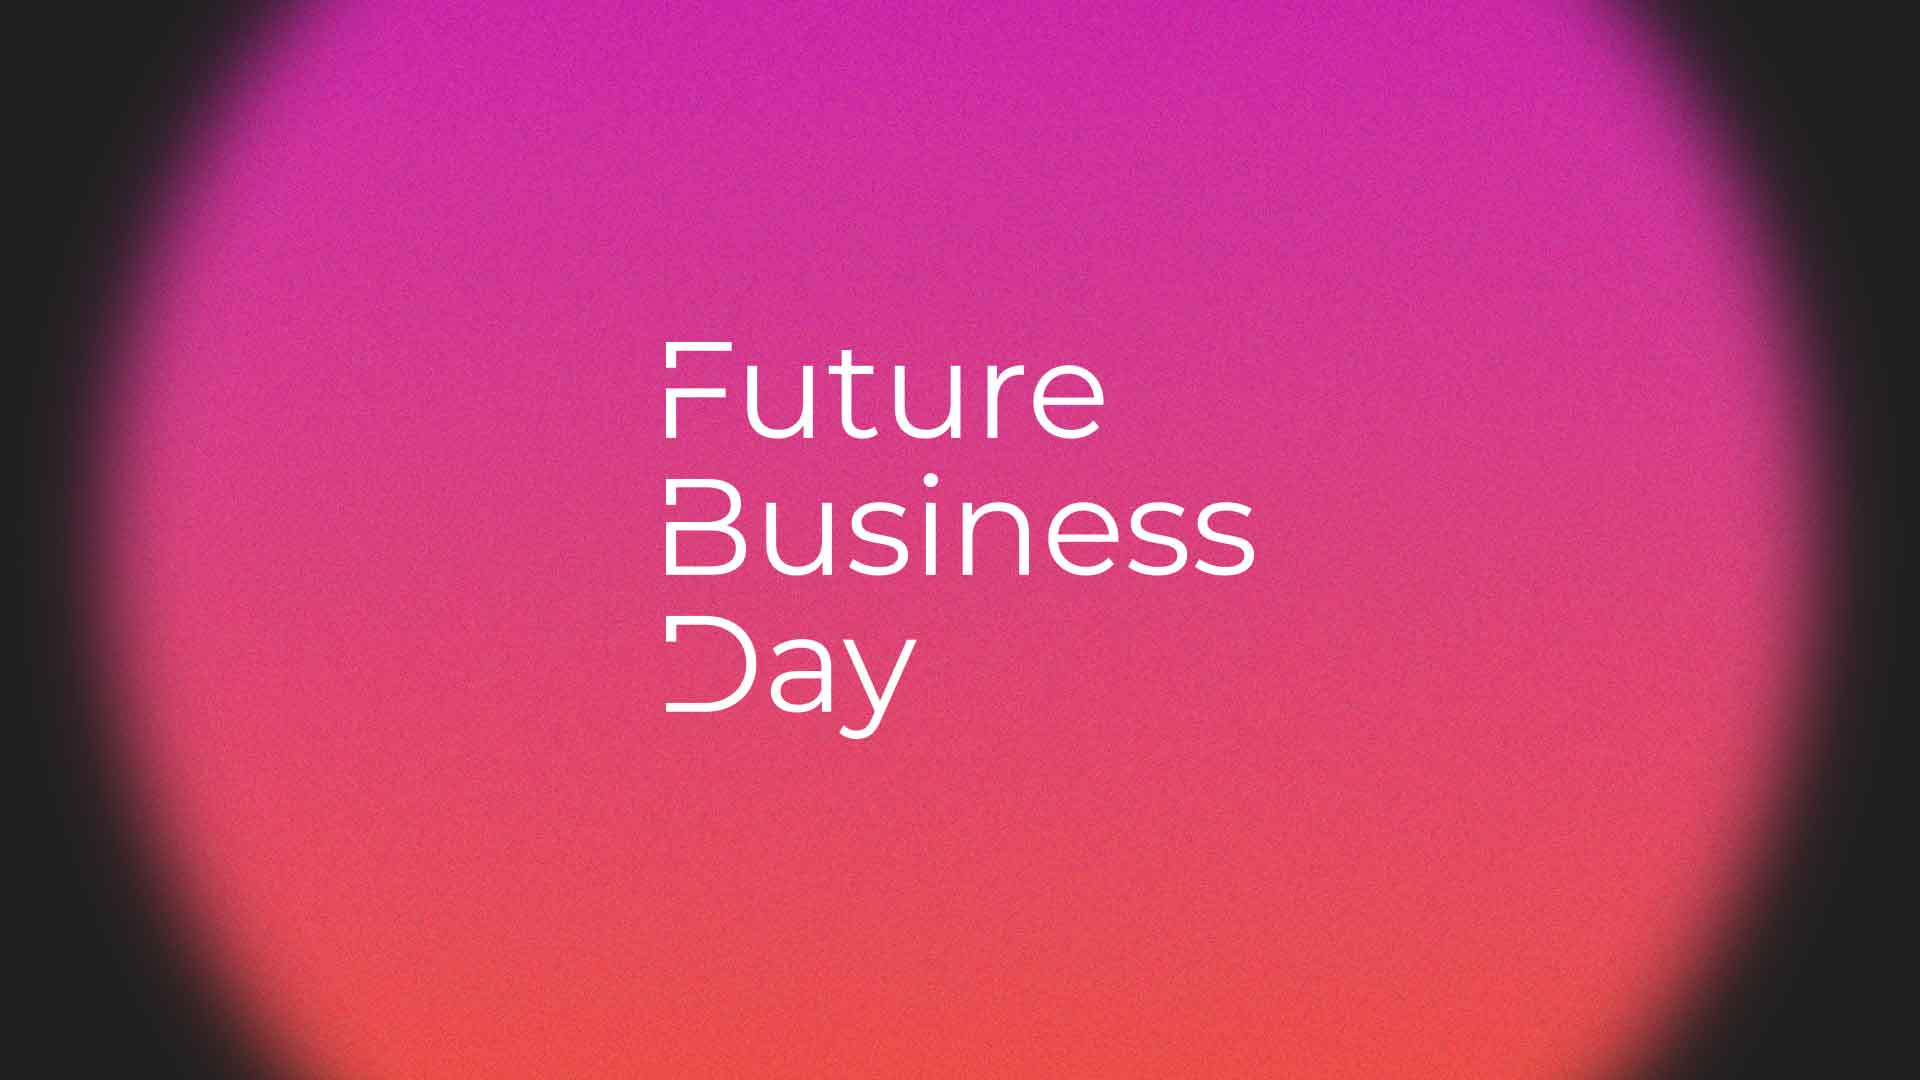 Future Business Day - Energy & Utility